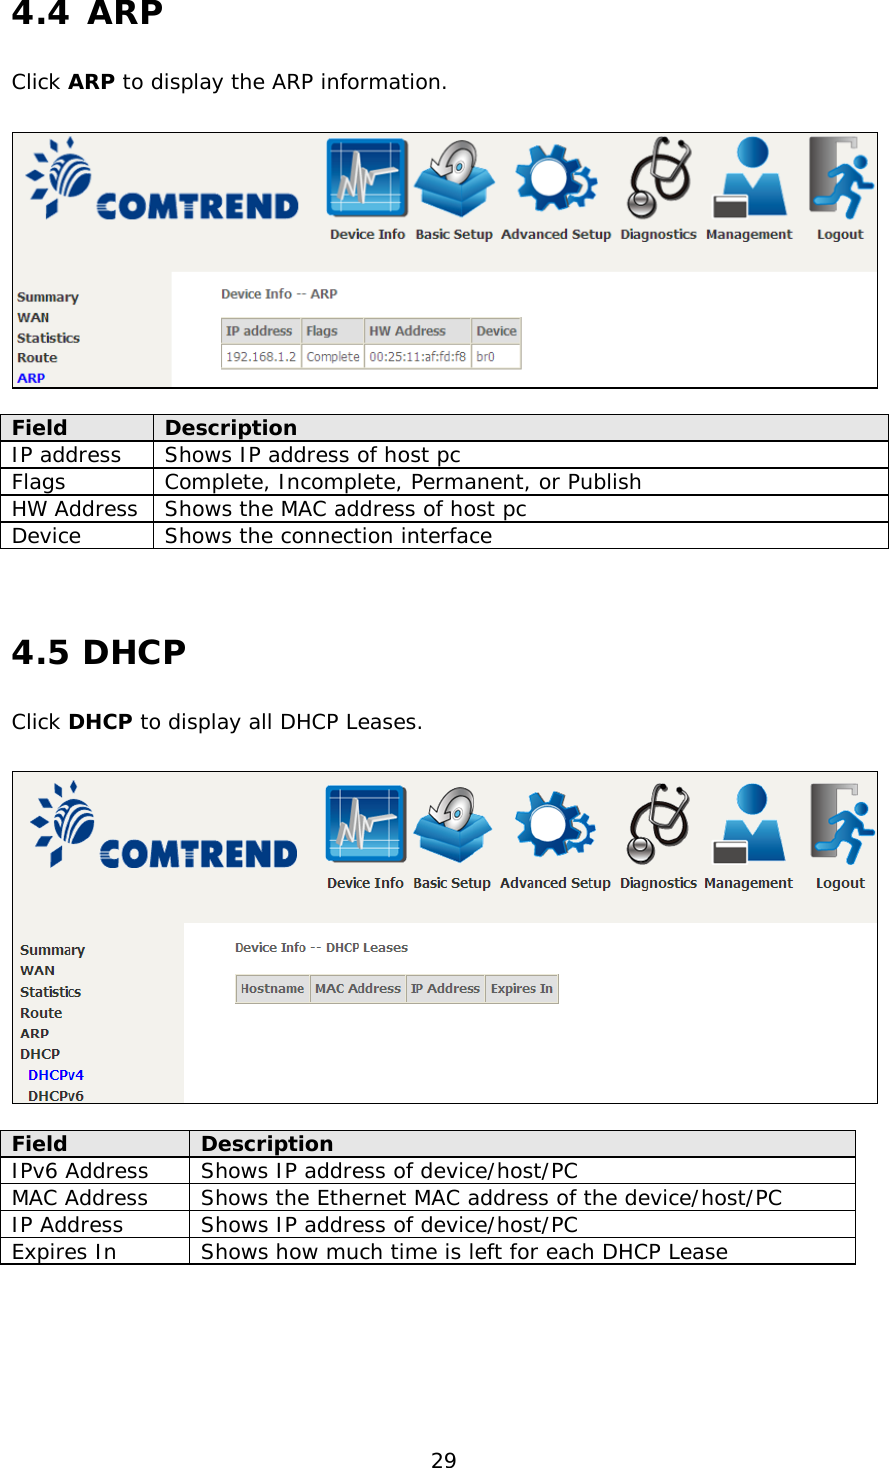  29 4.4 ARP Click ARP to display the ARP information.    Field Description IP address Shows IP address of host pc Flags Complete, Incomplete, Permanent, or Publish HW Address Shows the MAC address of host pc Device Shows the connection interface    4.5 DHCP Click DHCP to display all DHCP Leases.    Field Description IPv6 Address Shows IP address of device/host/PC MAC Address Shows the Ethernet MAC address of the device/host/PC IP Address Shows IP address of device/host/PC Expires In Shows how much time is left for each DHCP Lease 